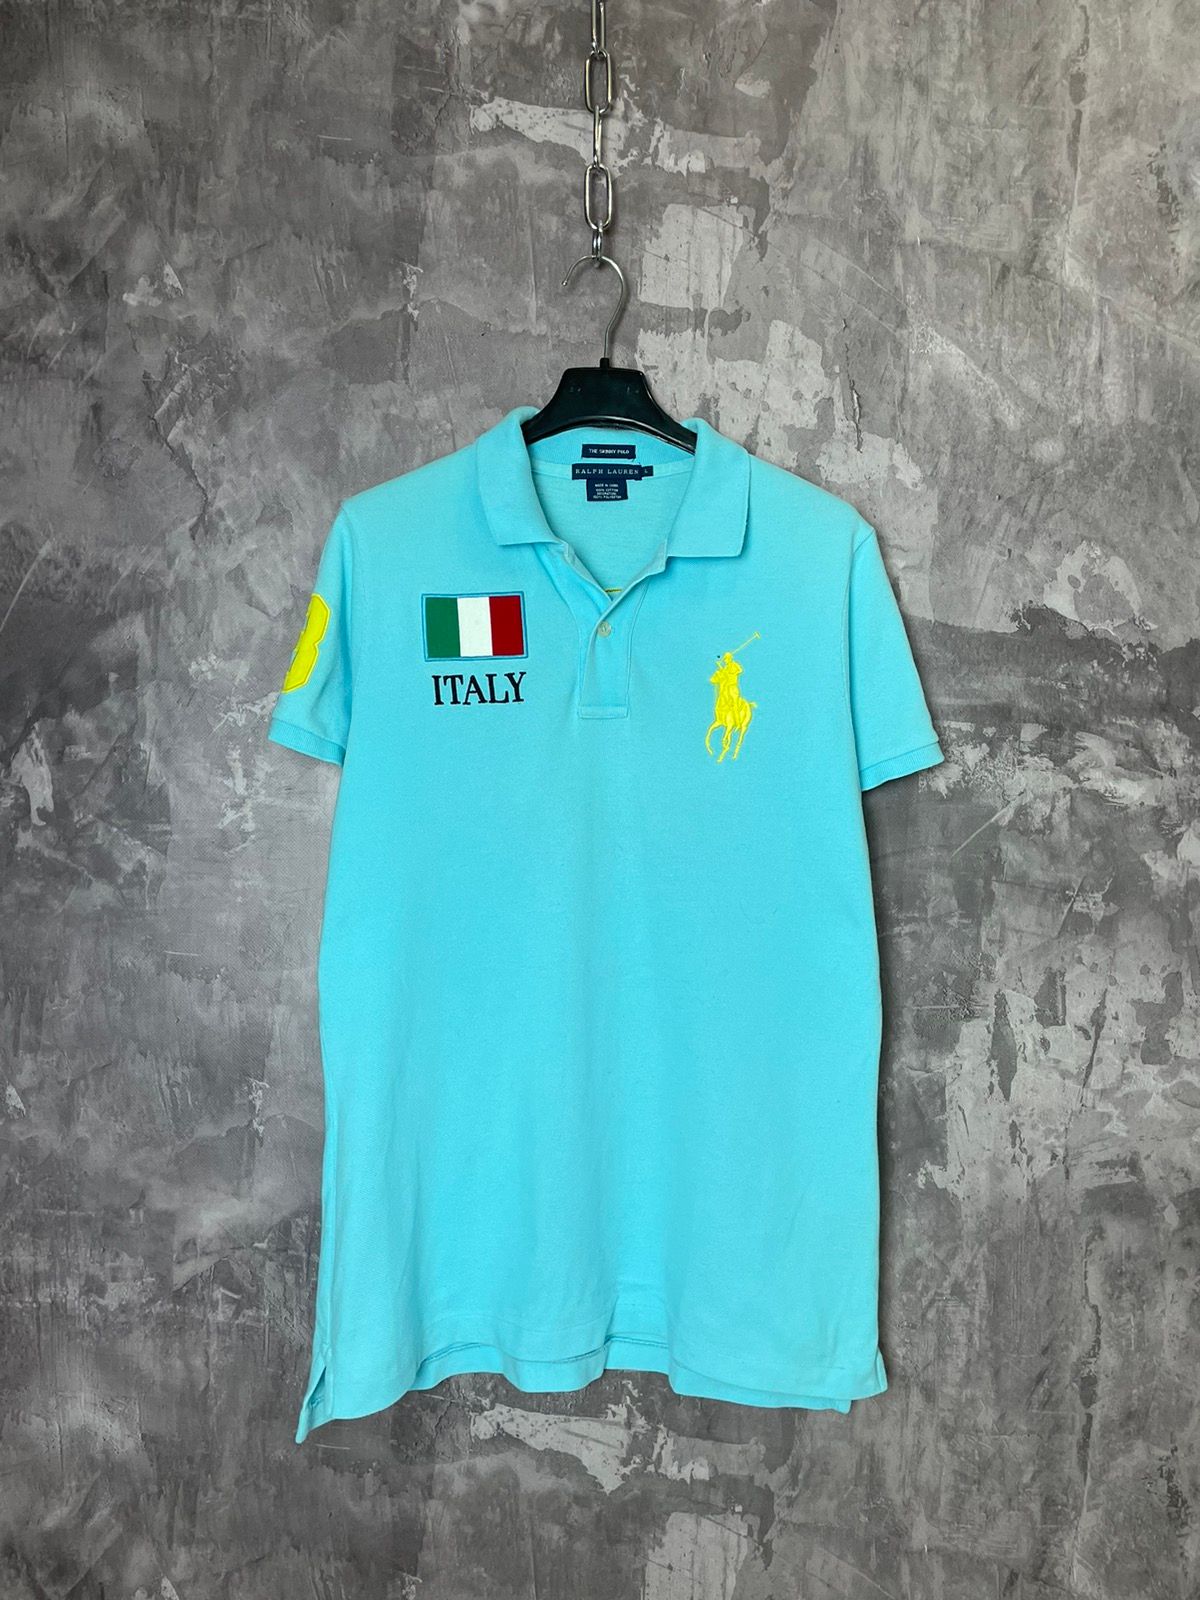 Ralph Lauren Polo Ralph Lauren vintage Italy polo chief keef style y2k ...